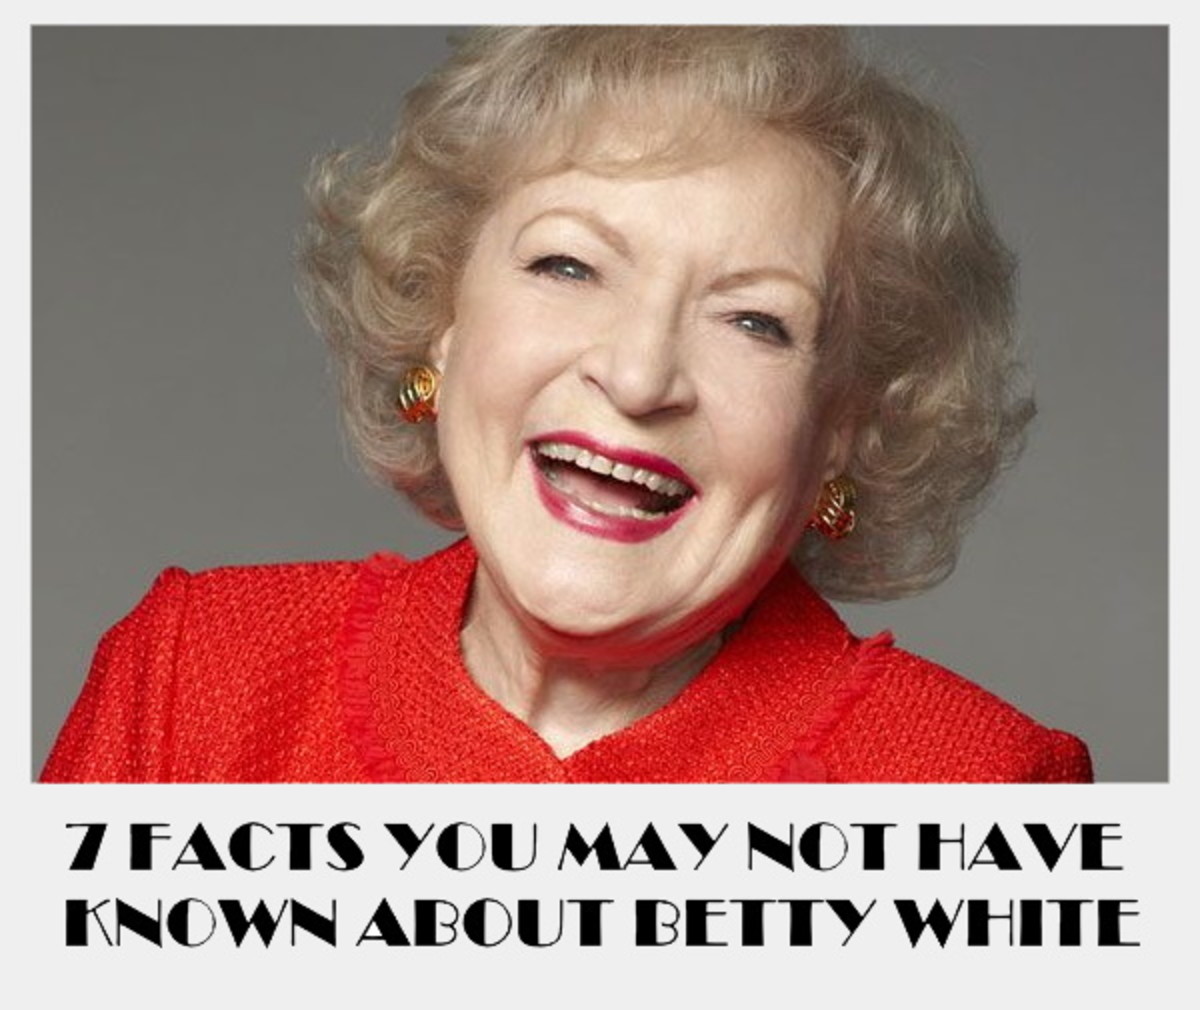 7 Facts You May Not Have Known About Betty White